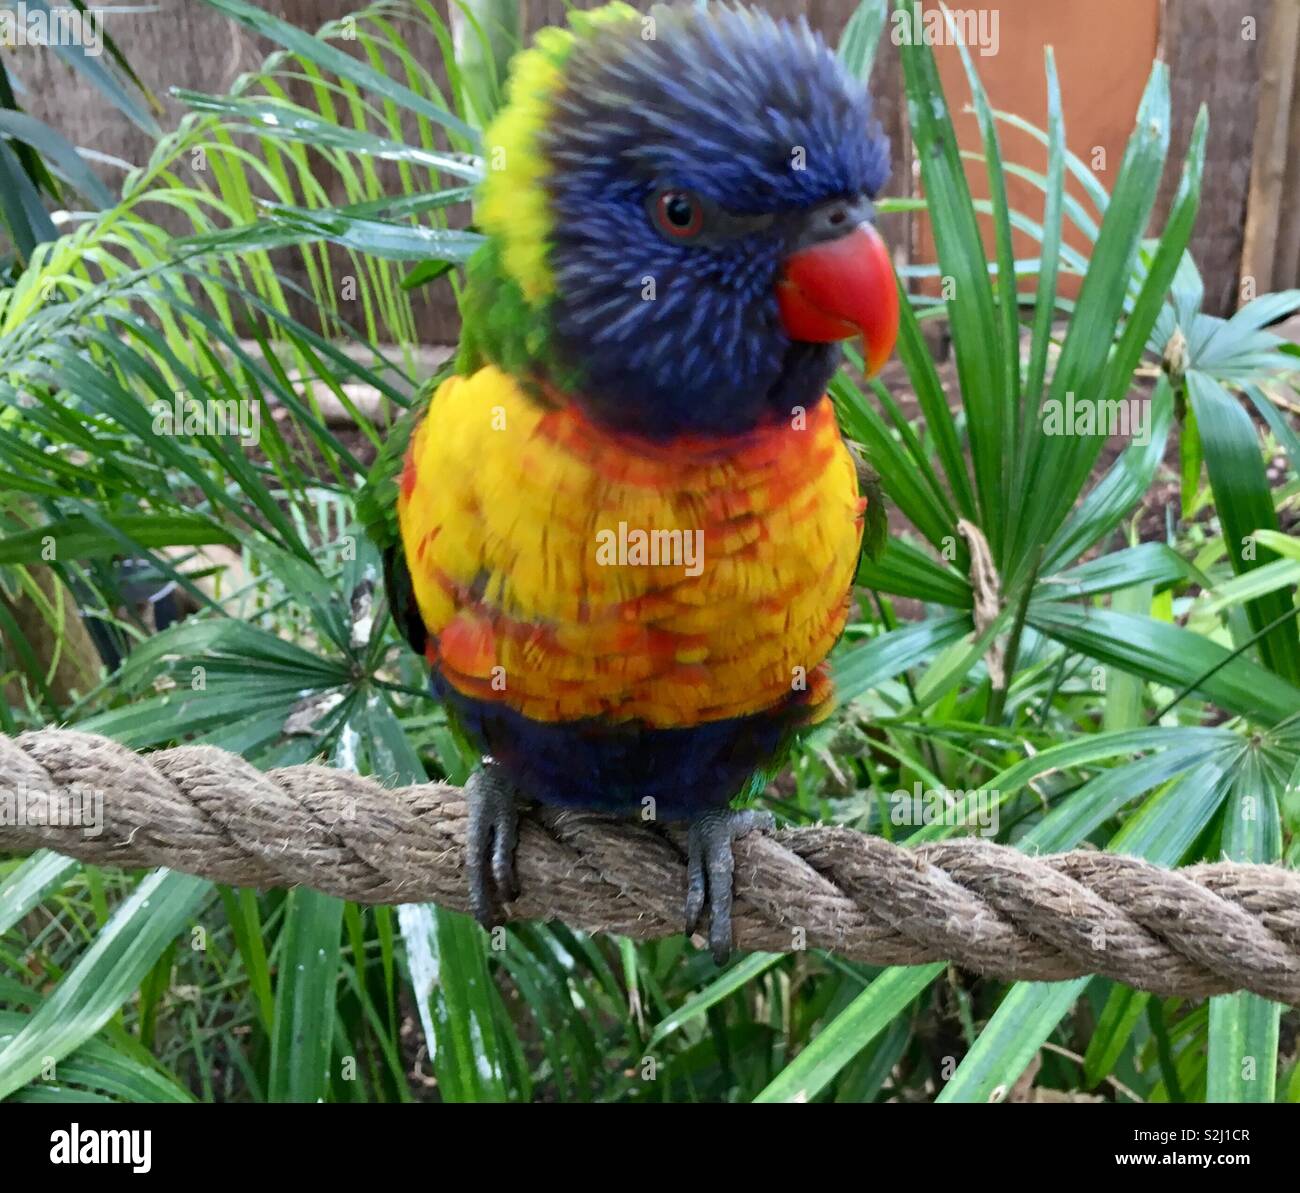 Australian Rainbow Lorikeet, a colourful blue and yellow parrot sitting on a rope, surrounded by green vegetation Stock Photo